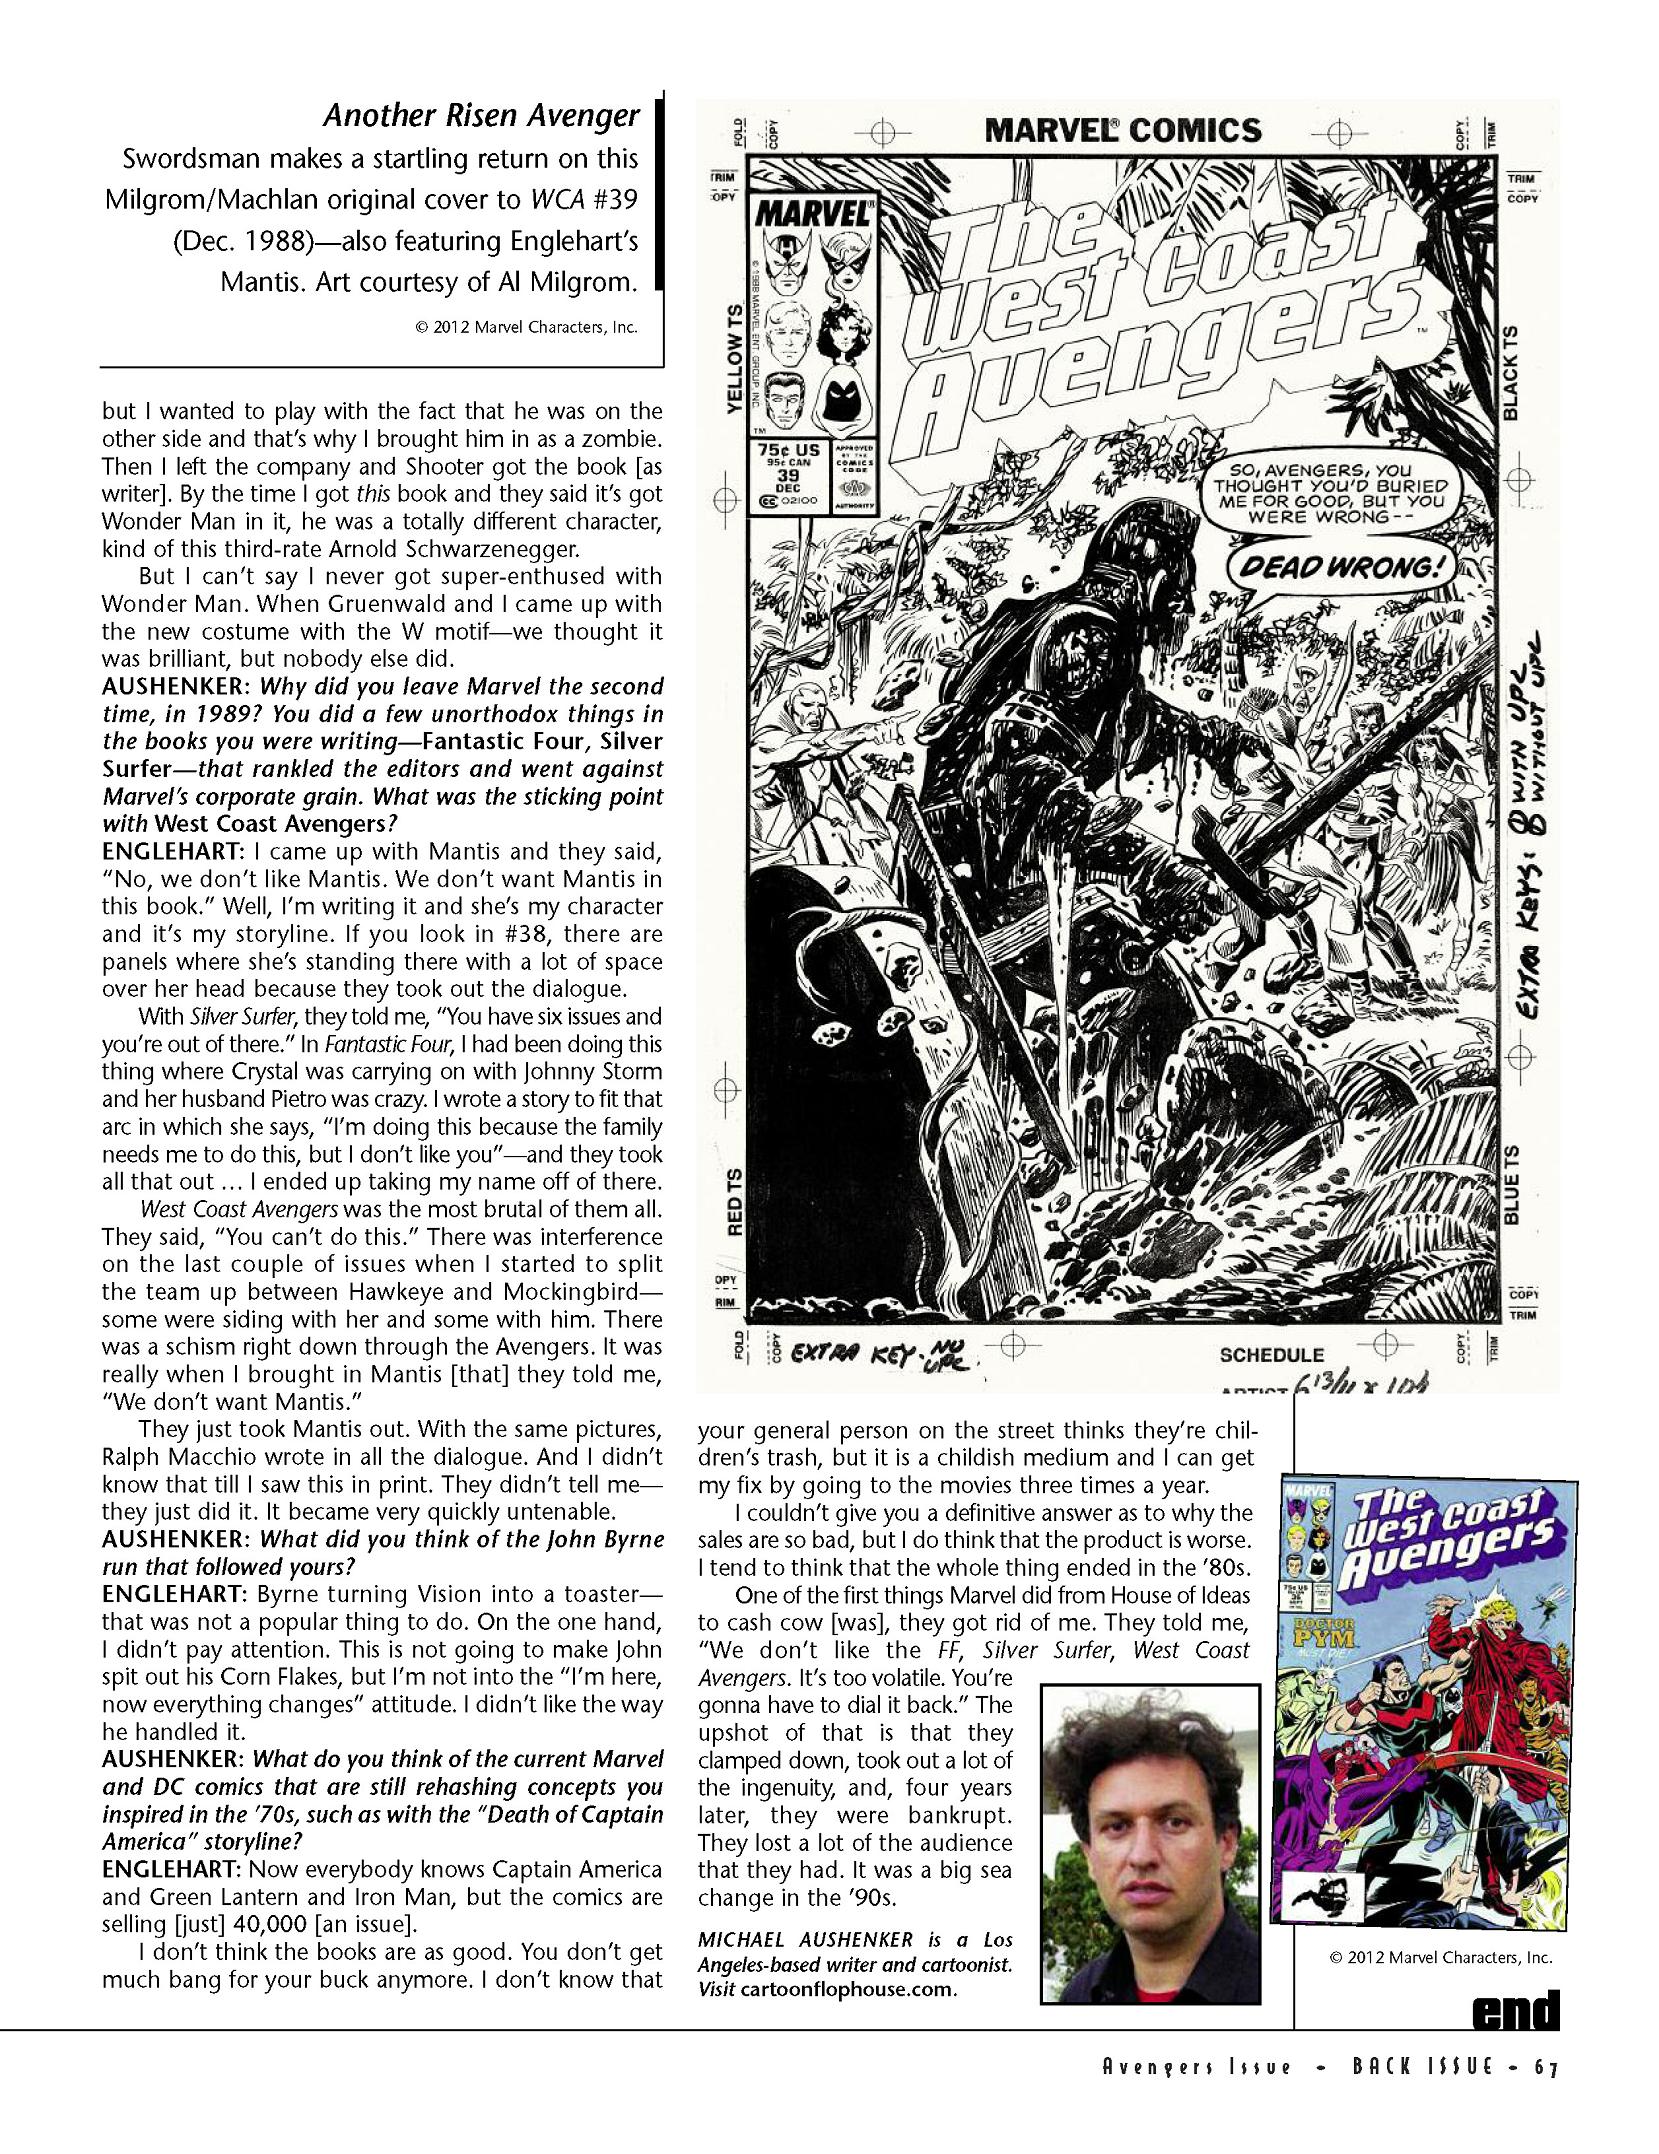 Read online Back Issue comic -  Issue #56 - 65